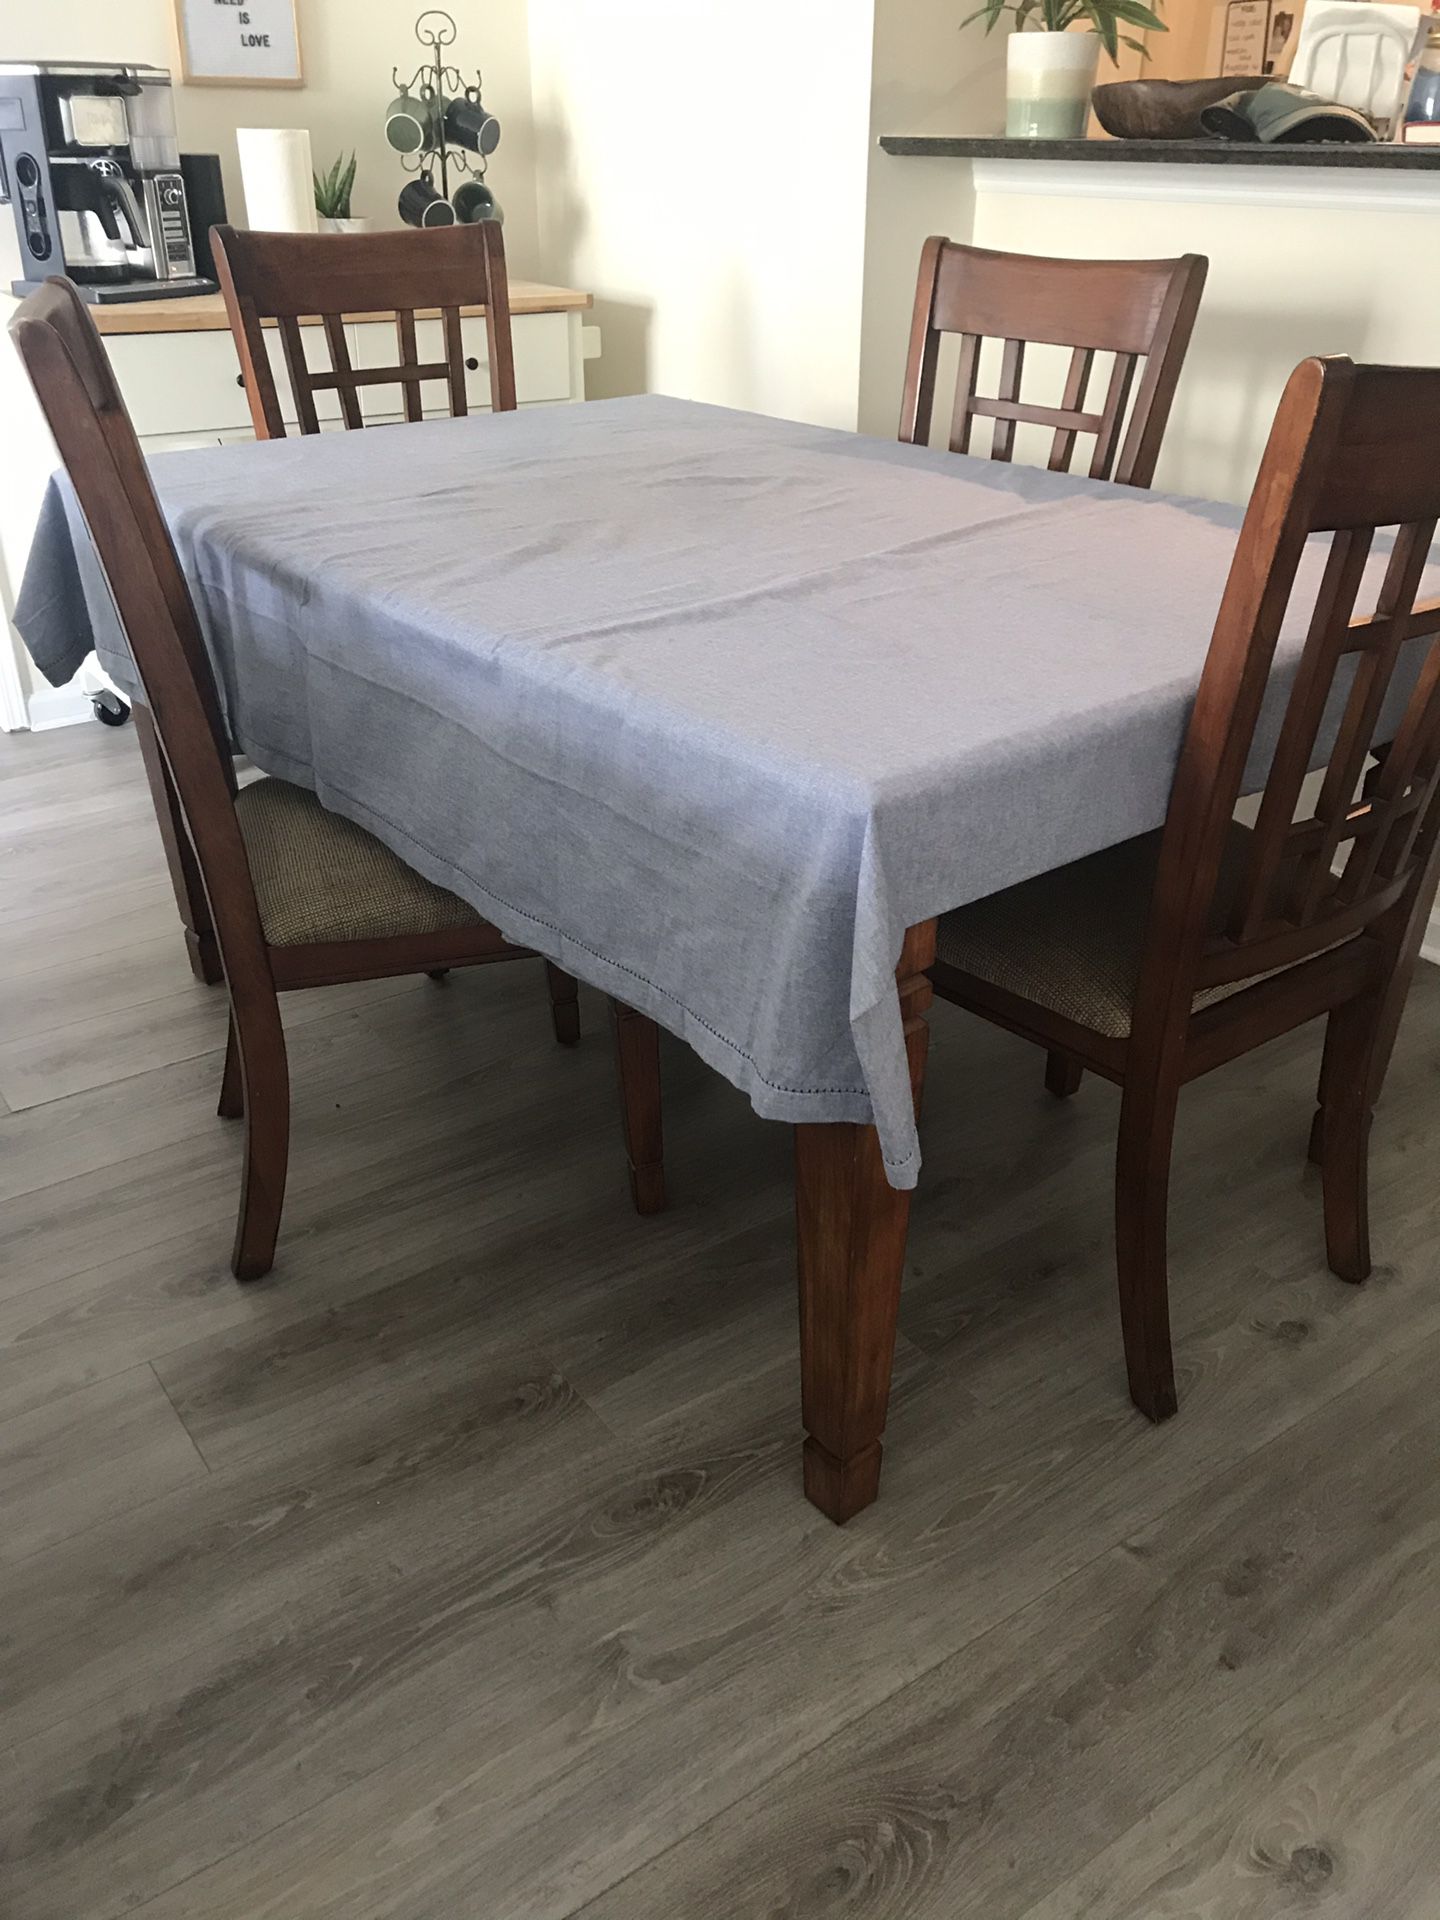 Brown wooden dining table